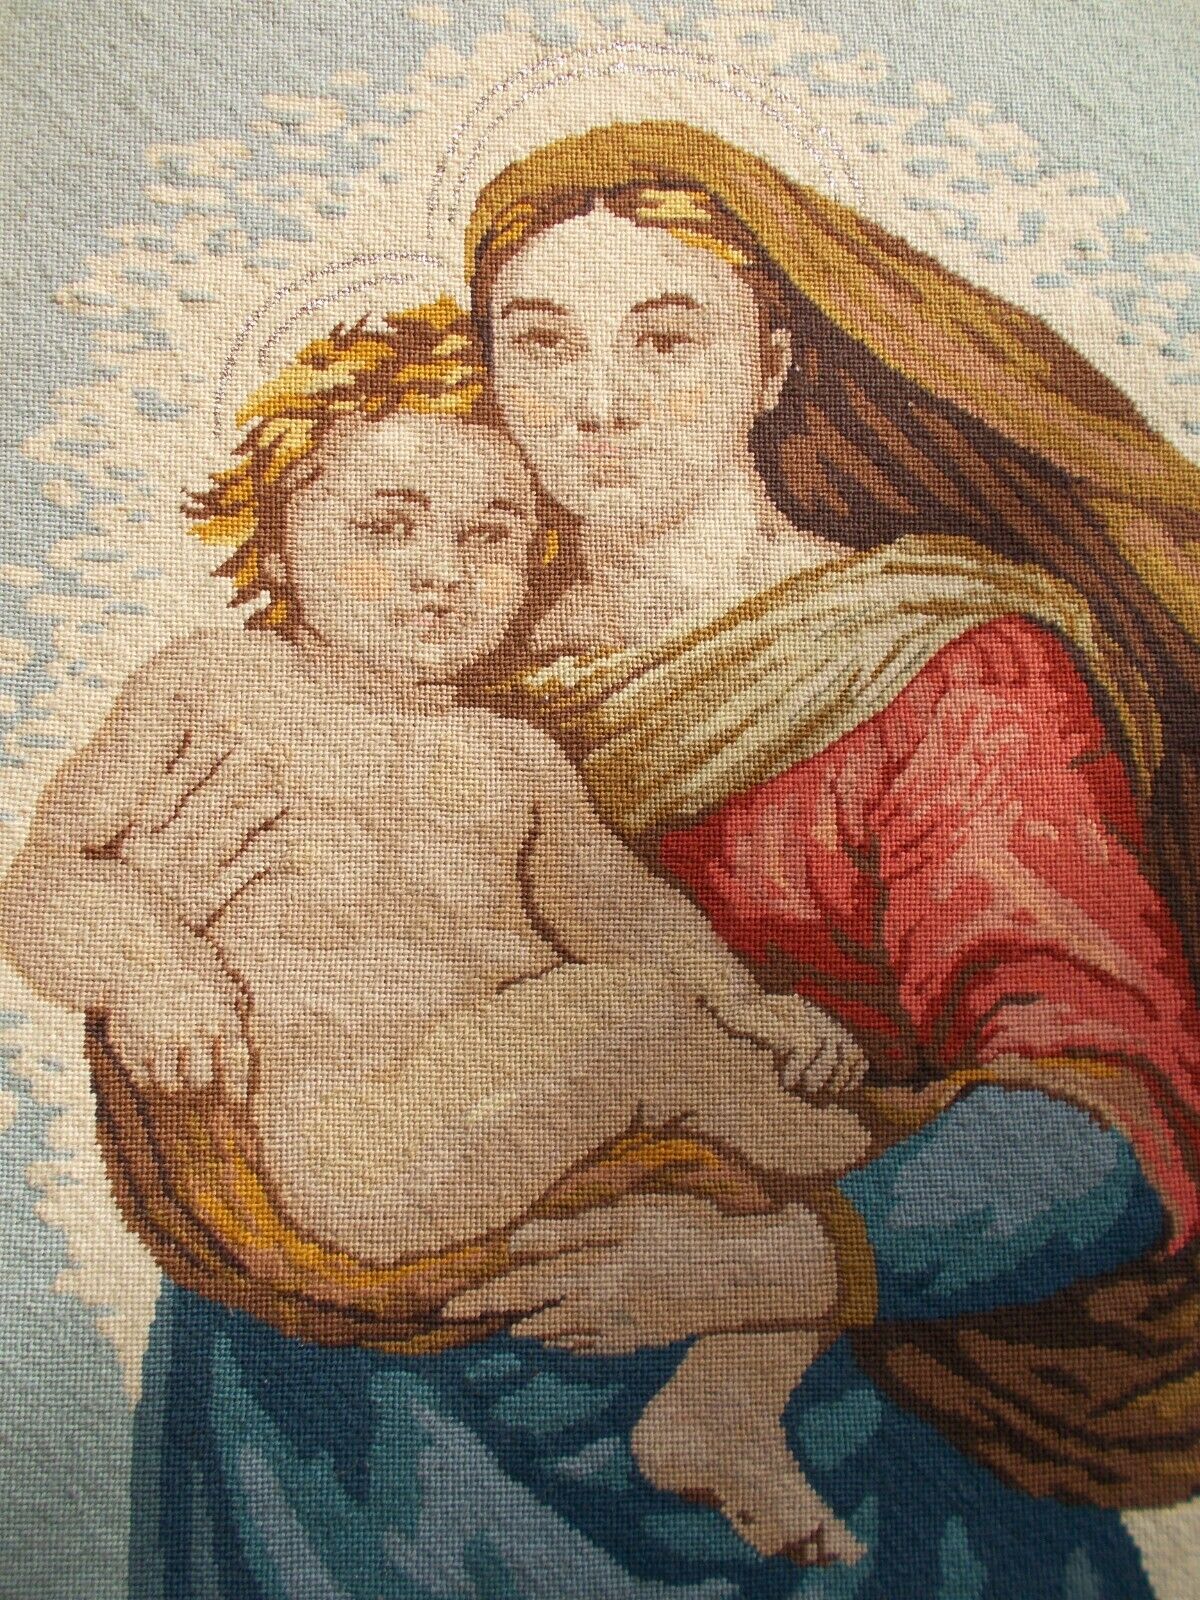 Antique Beautiful Framed Needlepoint Virgin Mary And Baby Jesus Tapestry